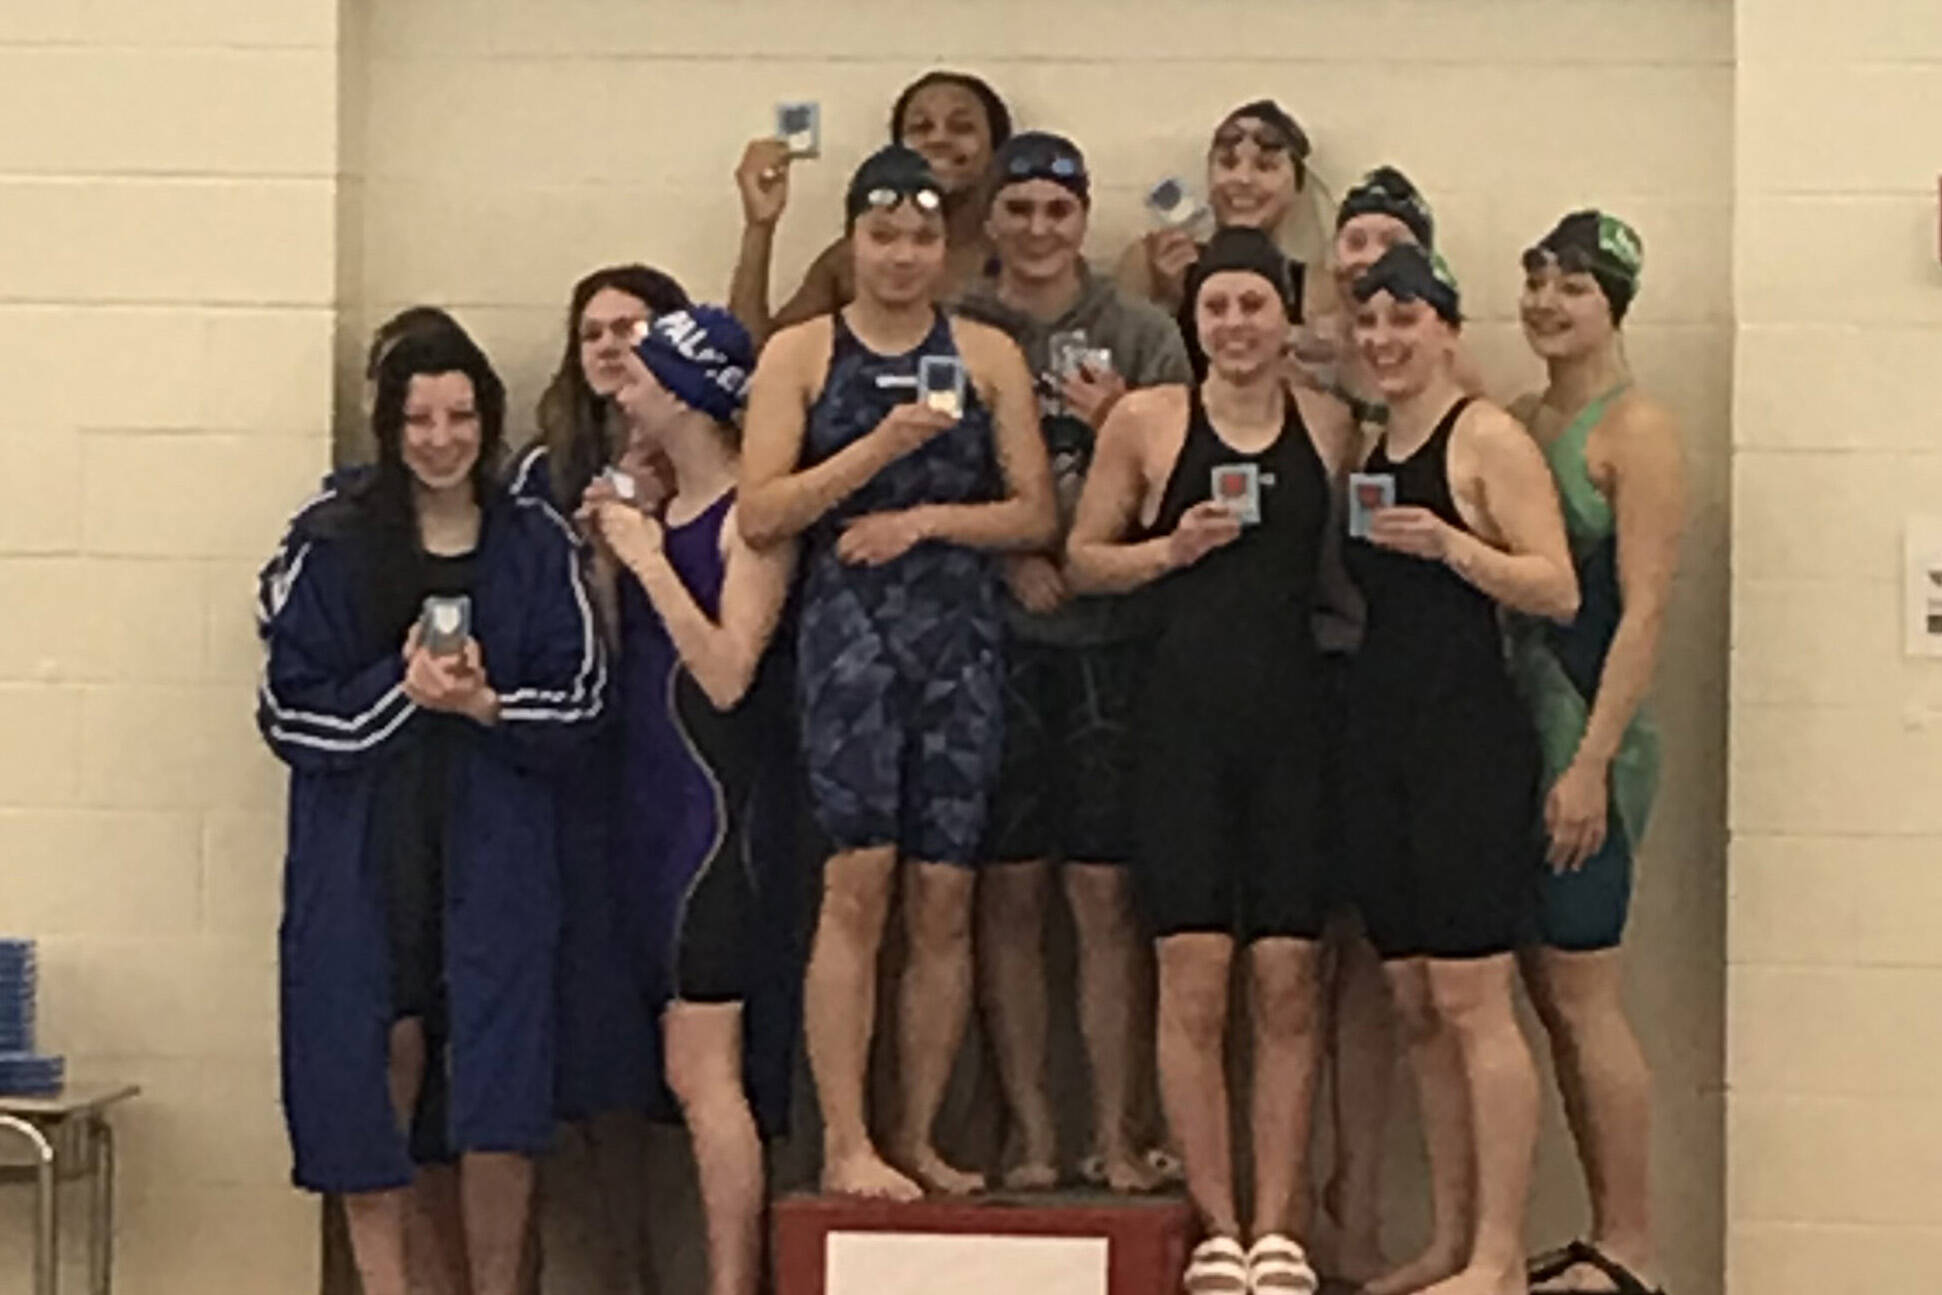 The Lady Mariners took first place in the 200 freestyle relay during the Northern Lights Conference meet Saturday, Oct. 30, at the Palmer Pool and are state bound! Pictured on top of the podium are McKenna Carlin, Cassidy Carroll, Jillian Crooks and Carly Nelson. (Photo provided by Dana Jaworski)